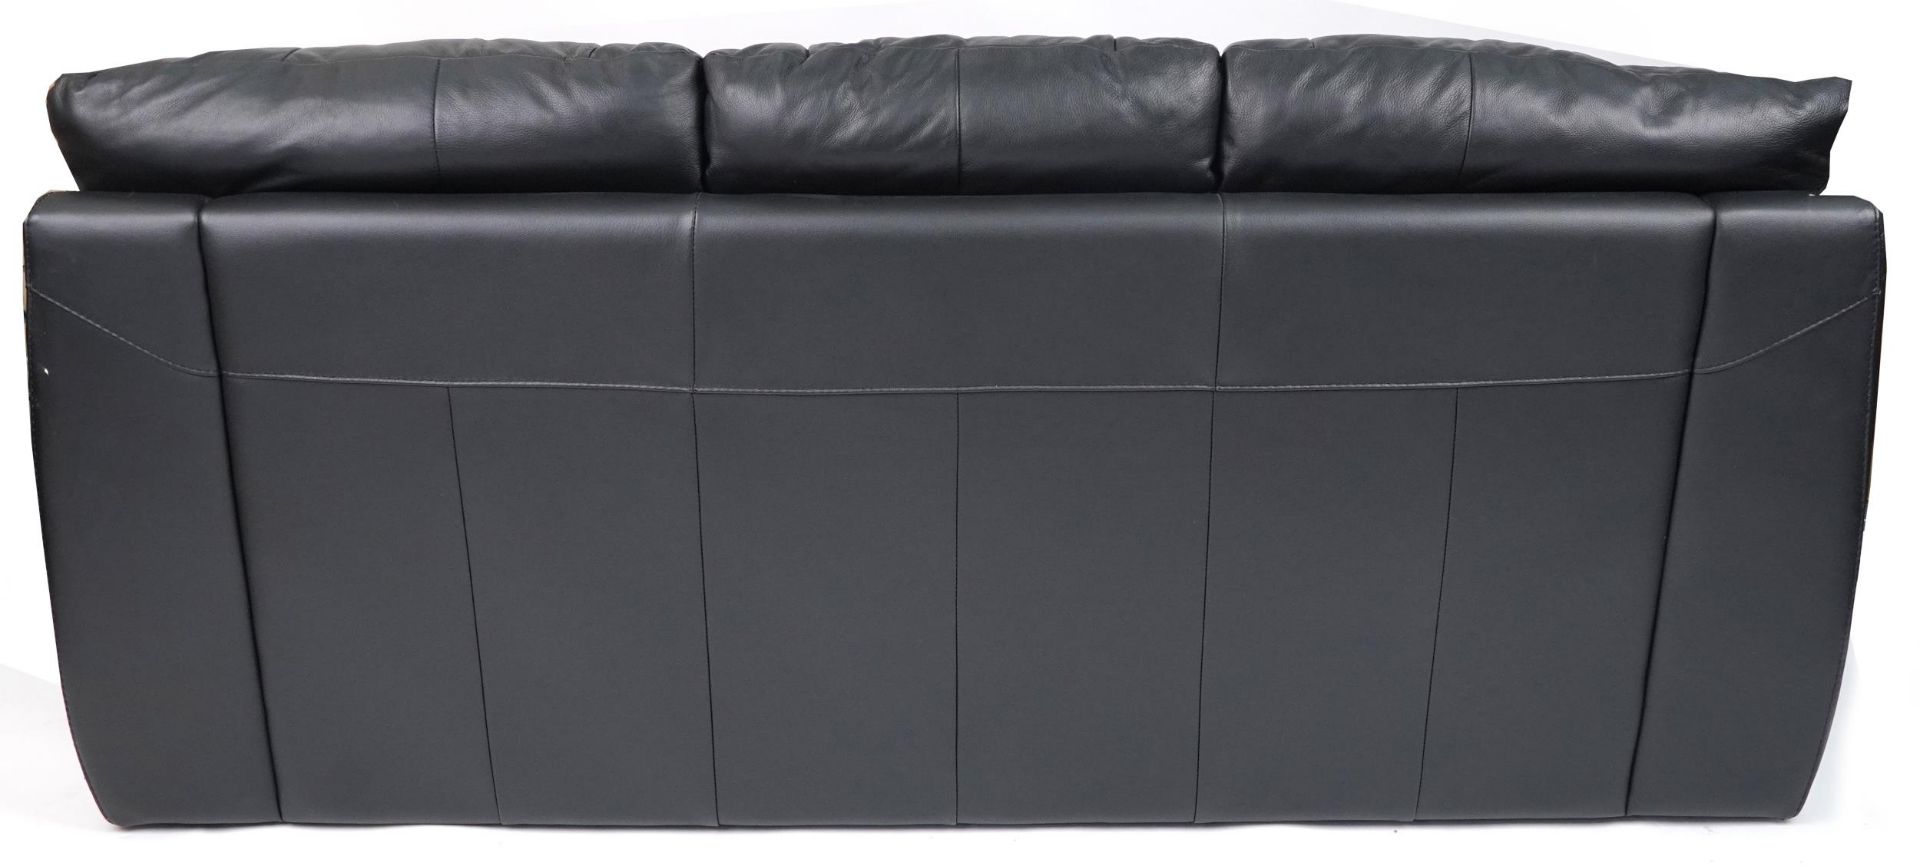 Contemporary three seater settee with black leather upholstery, 90cm H x 200cm W x 90cm D - Bild 3 aus 3